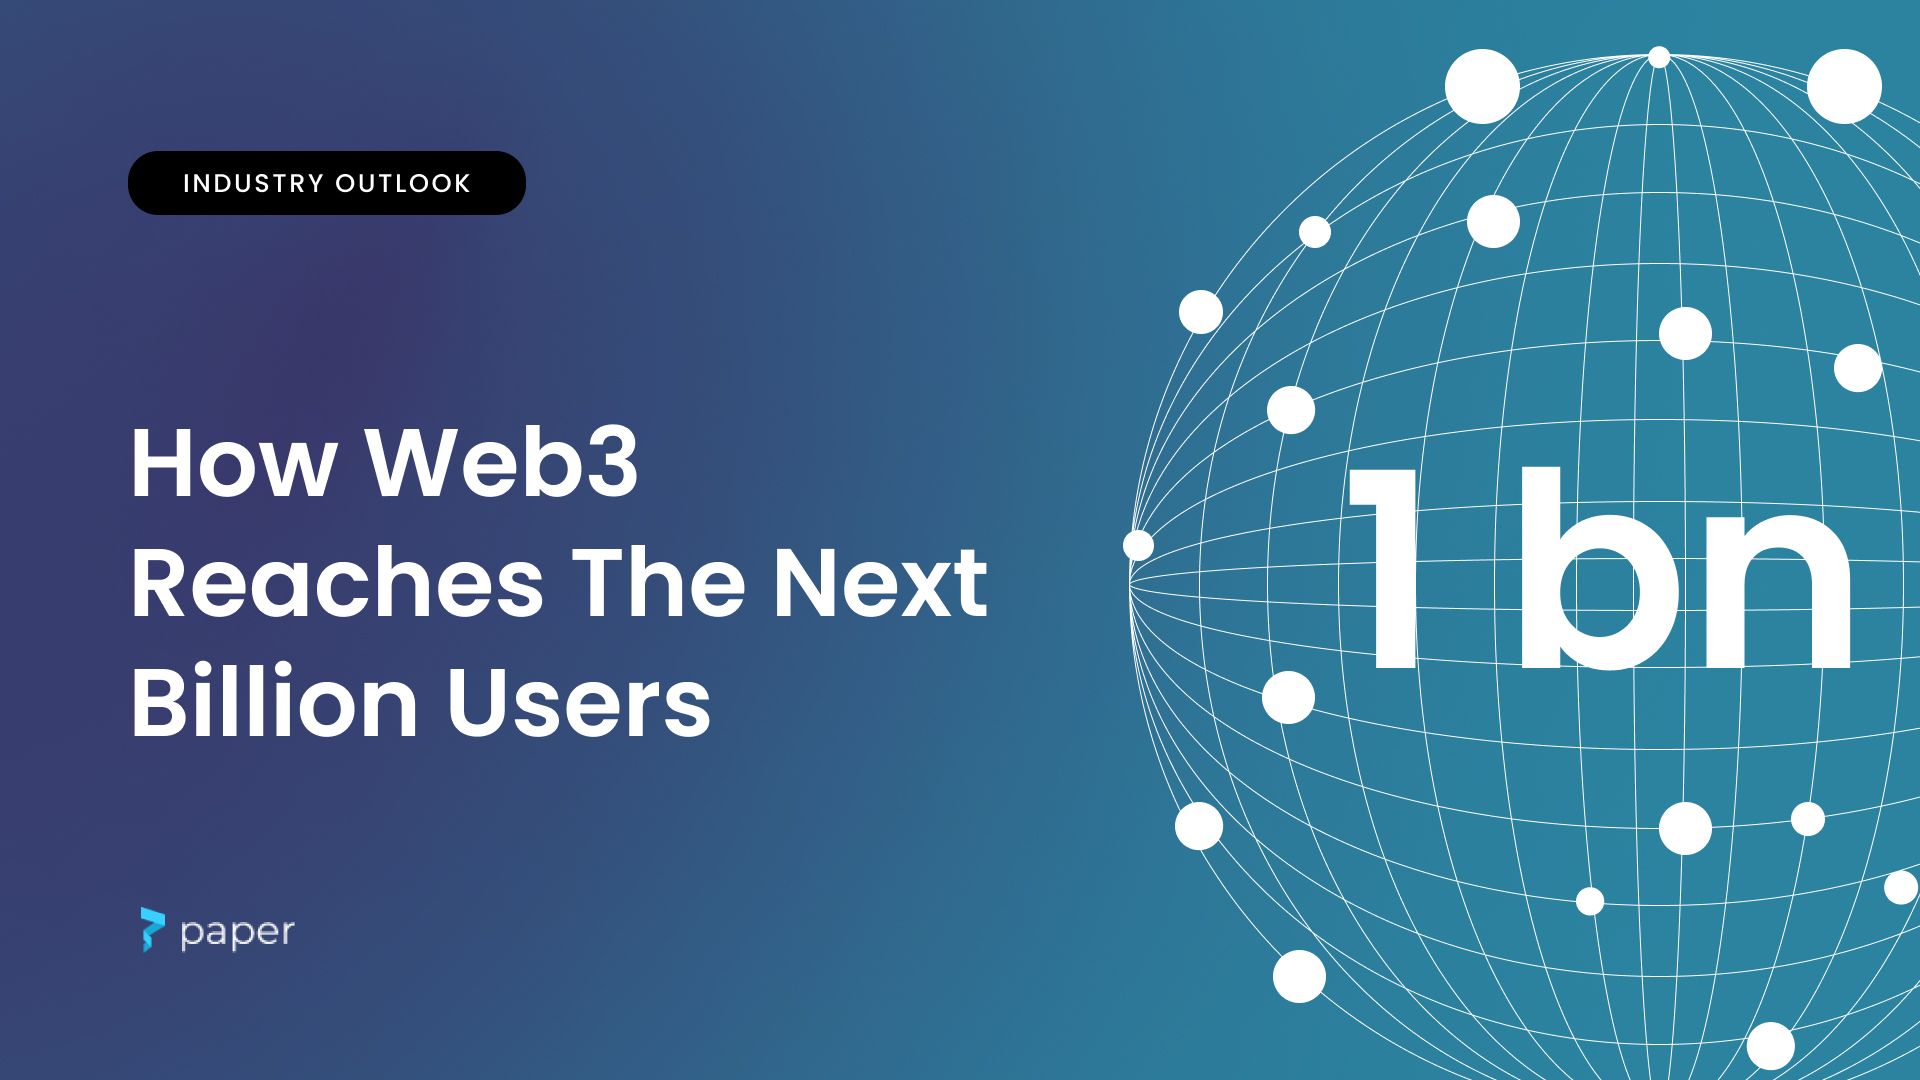 How web3 reaches the next billion users